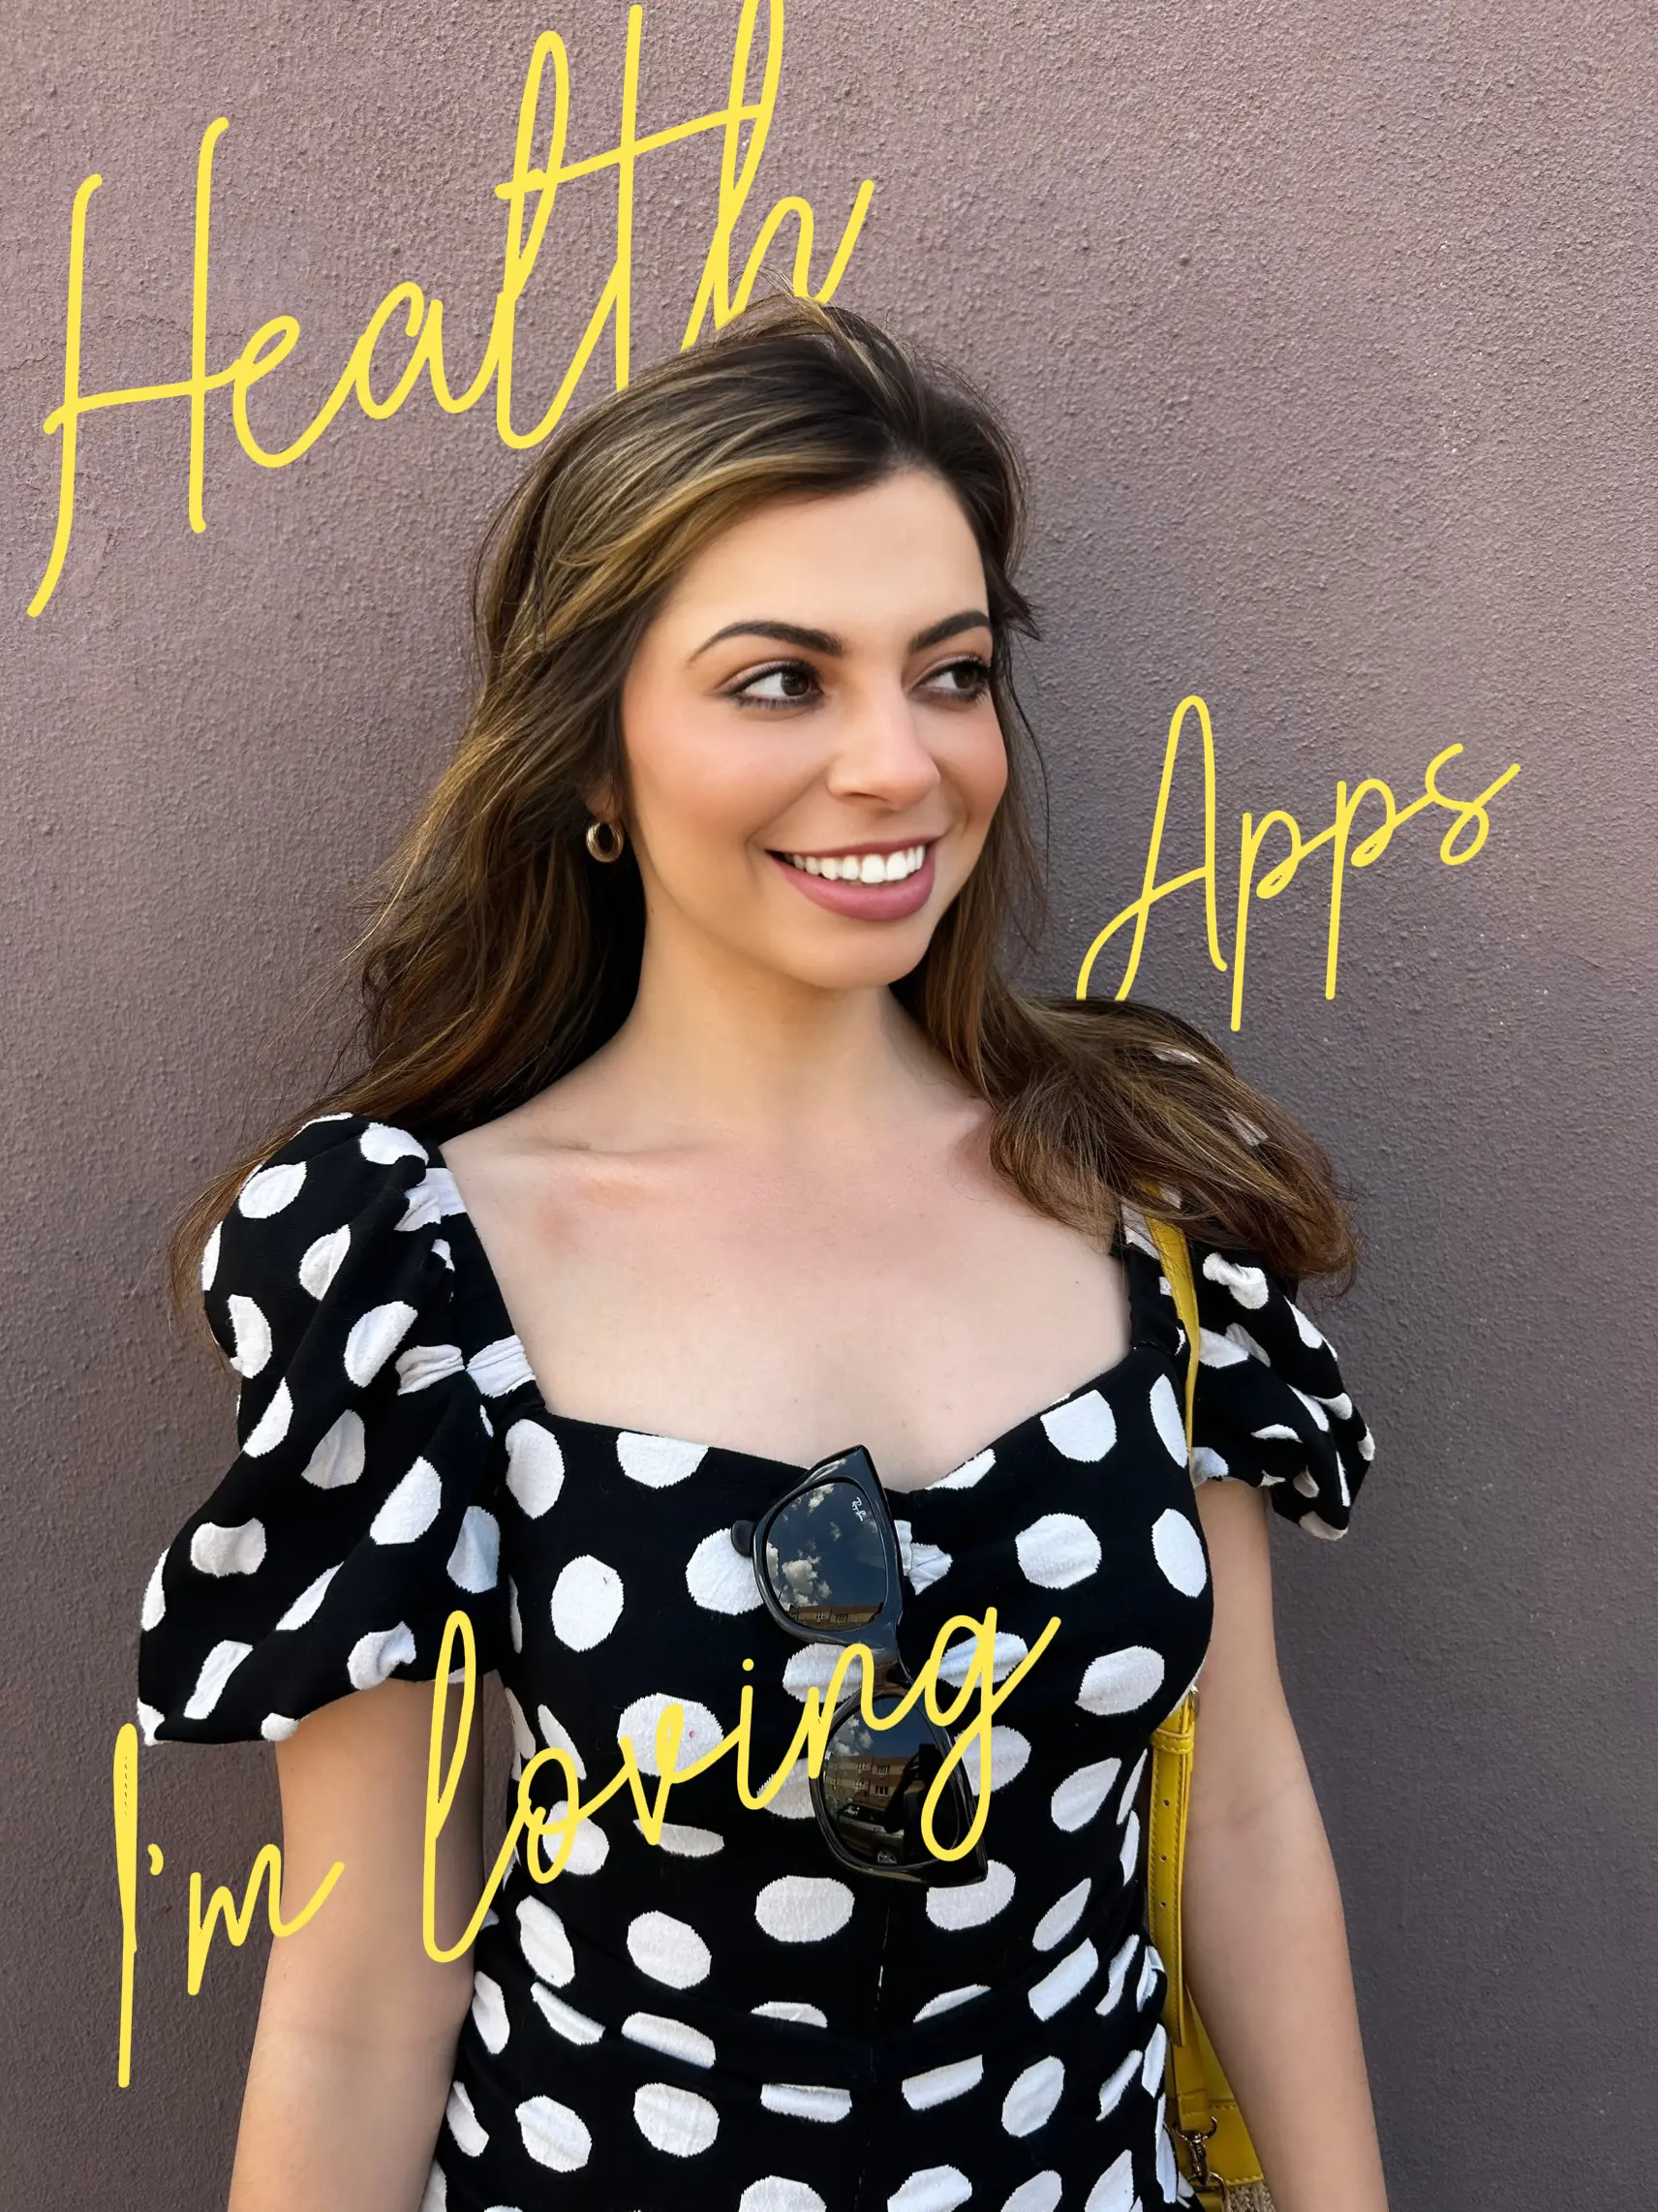 DAILY HEALTH APPS I’M LOVING AS A PSYCHOLOGIST's images